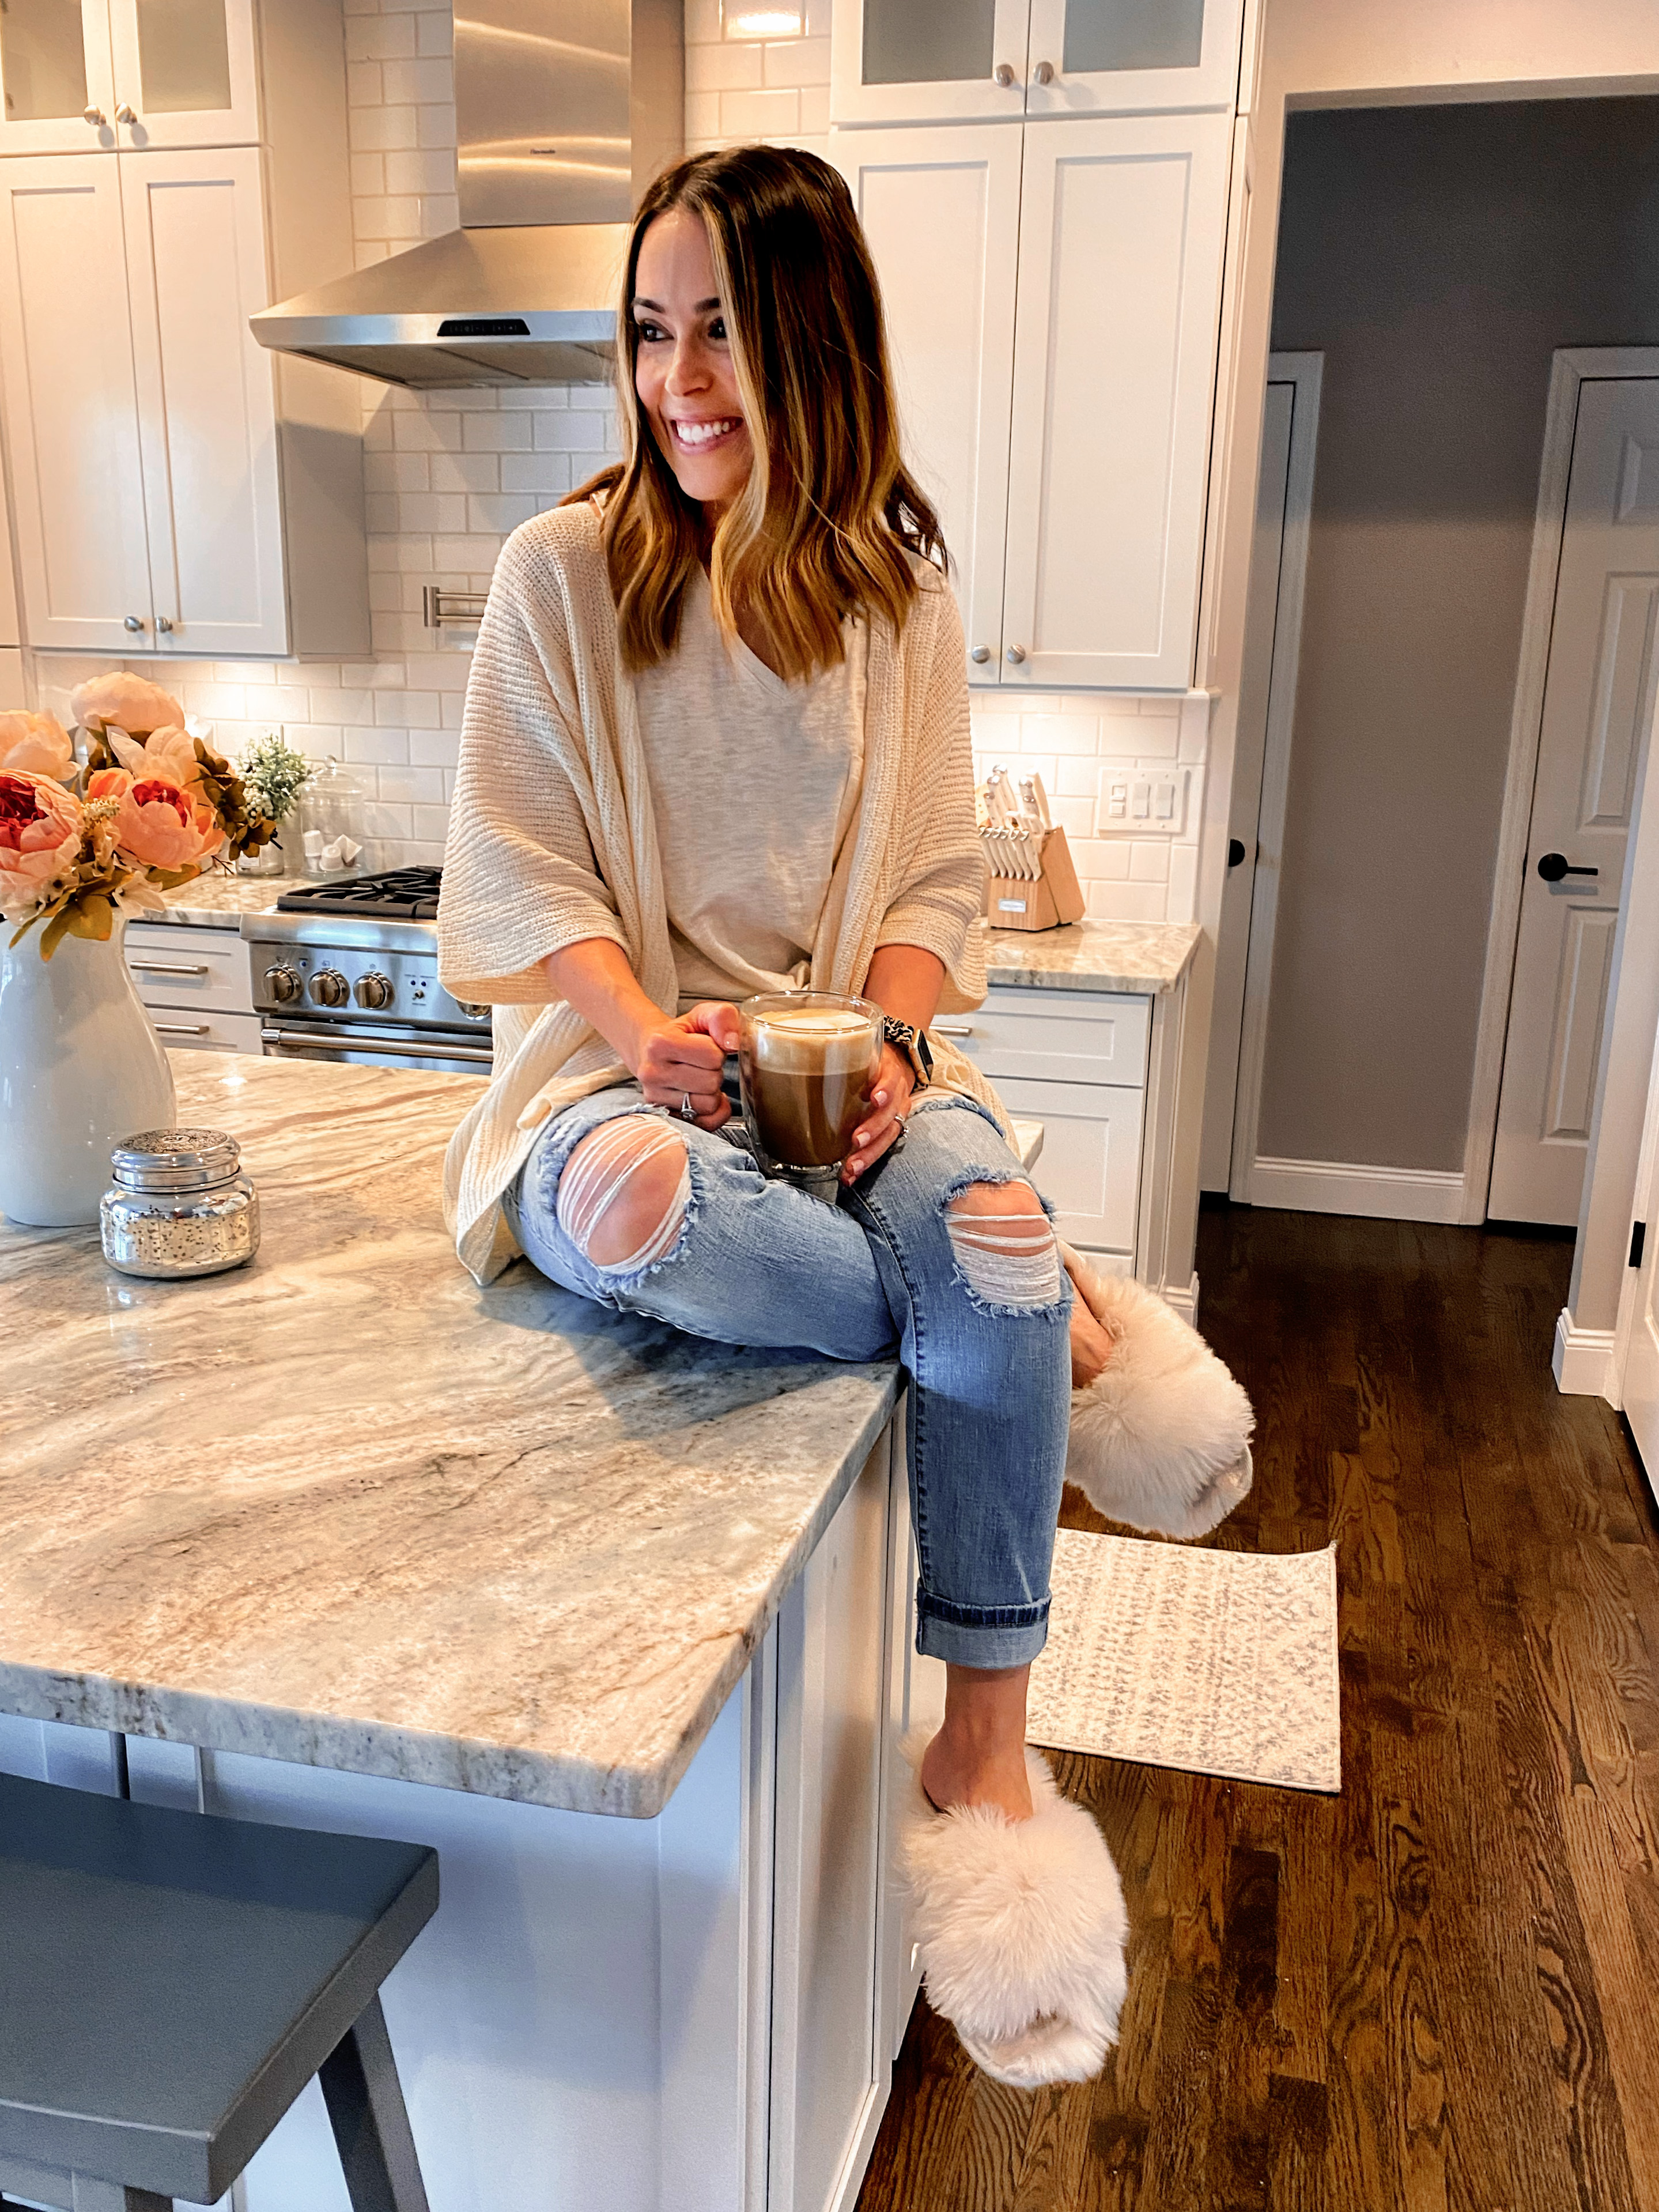 Comfy, chill-around-the-house outfit!